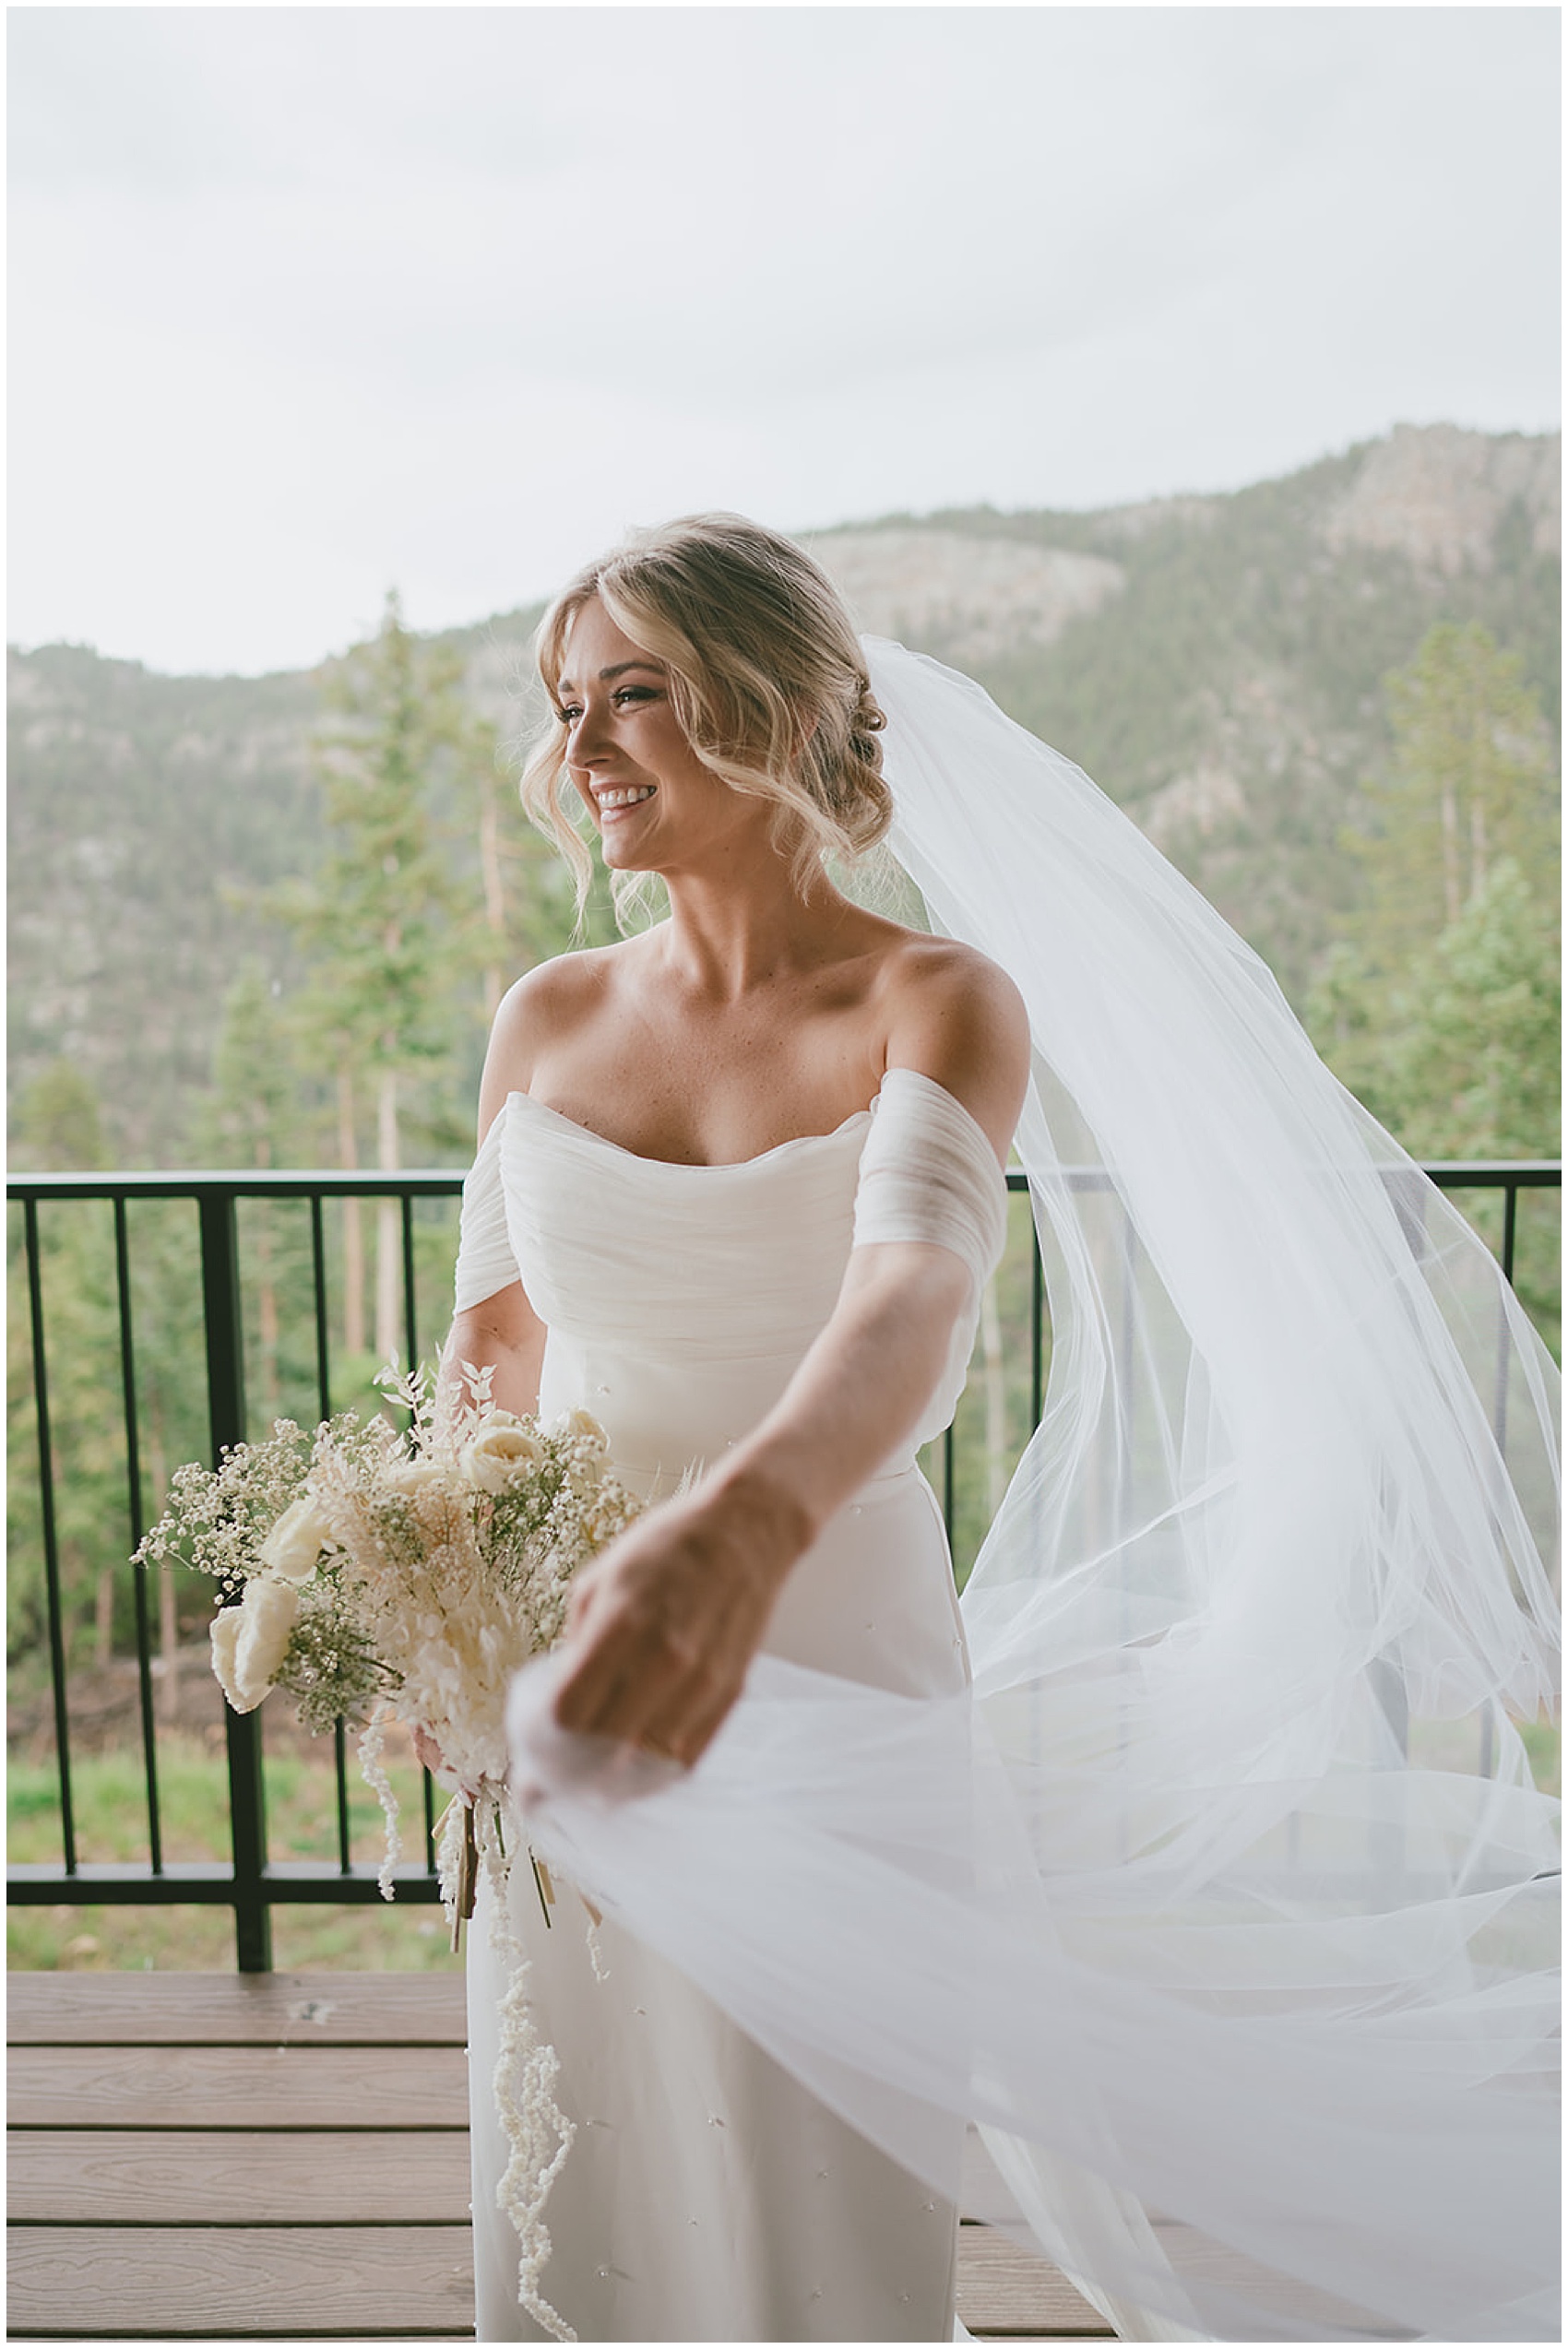 A bride walks on a deck holding her white rose bouquet